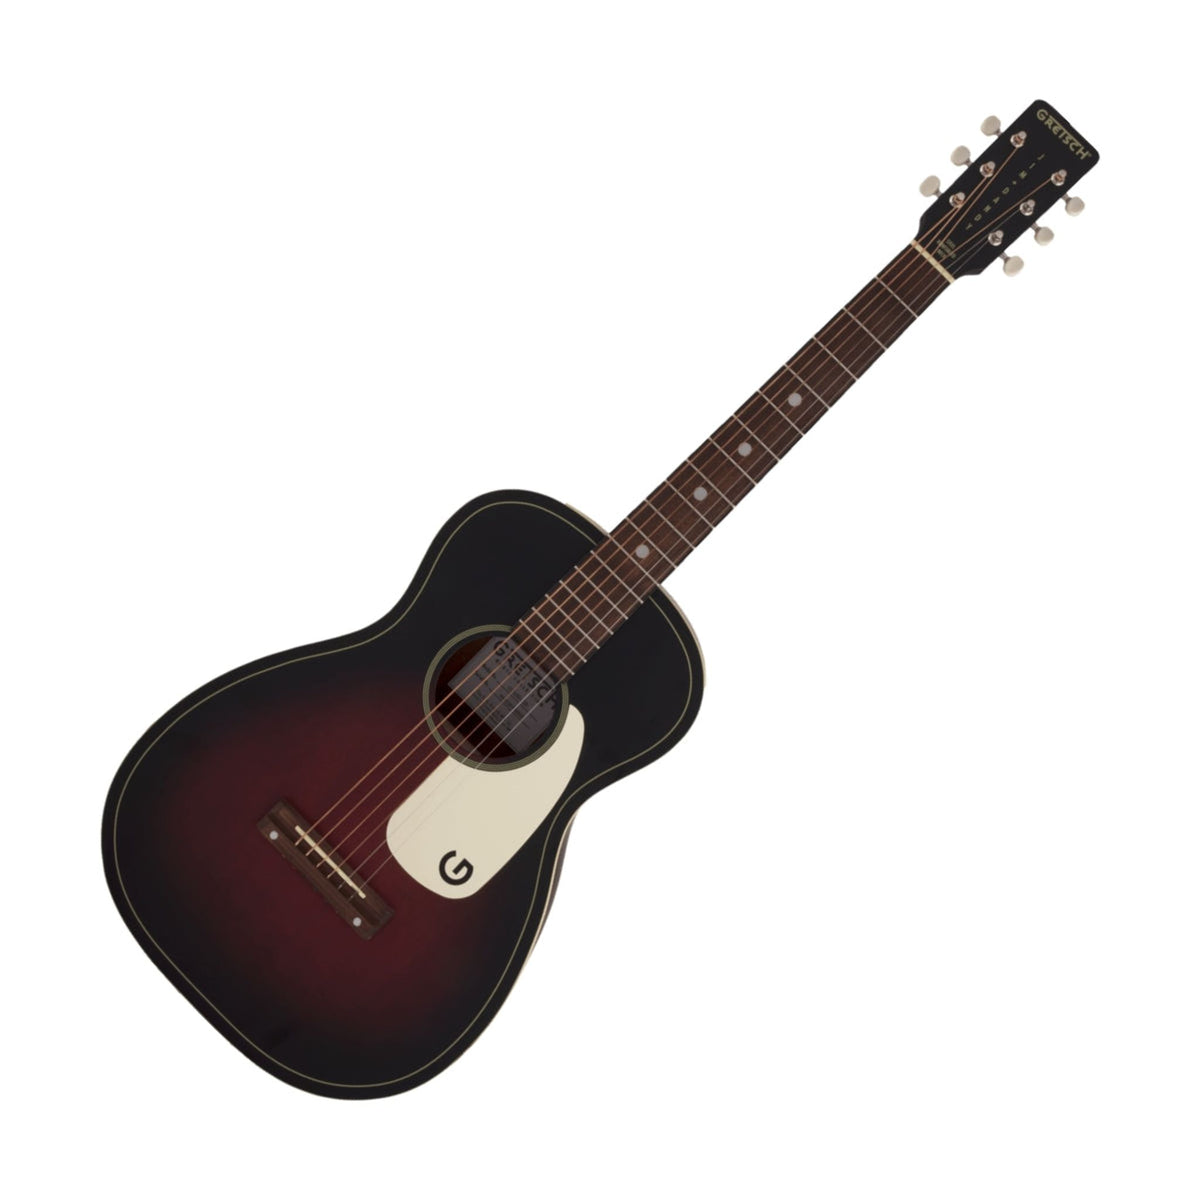 The Gretsch G9500 Jim Dandy Parlor Acoustic Guitar is faithful to the Gretsch® “Rex” parlor guitars of the 1930s, ‘40s and ‘50s, the G9500 Jim Dandy™ Flat Top parlor-style model embodies everything that was great about everyone’s first guitar.